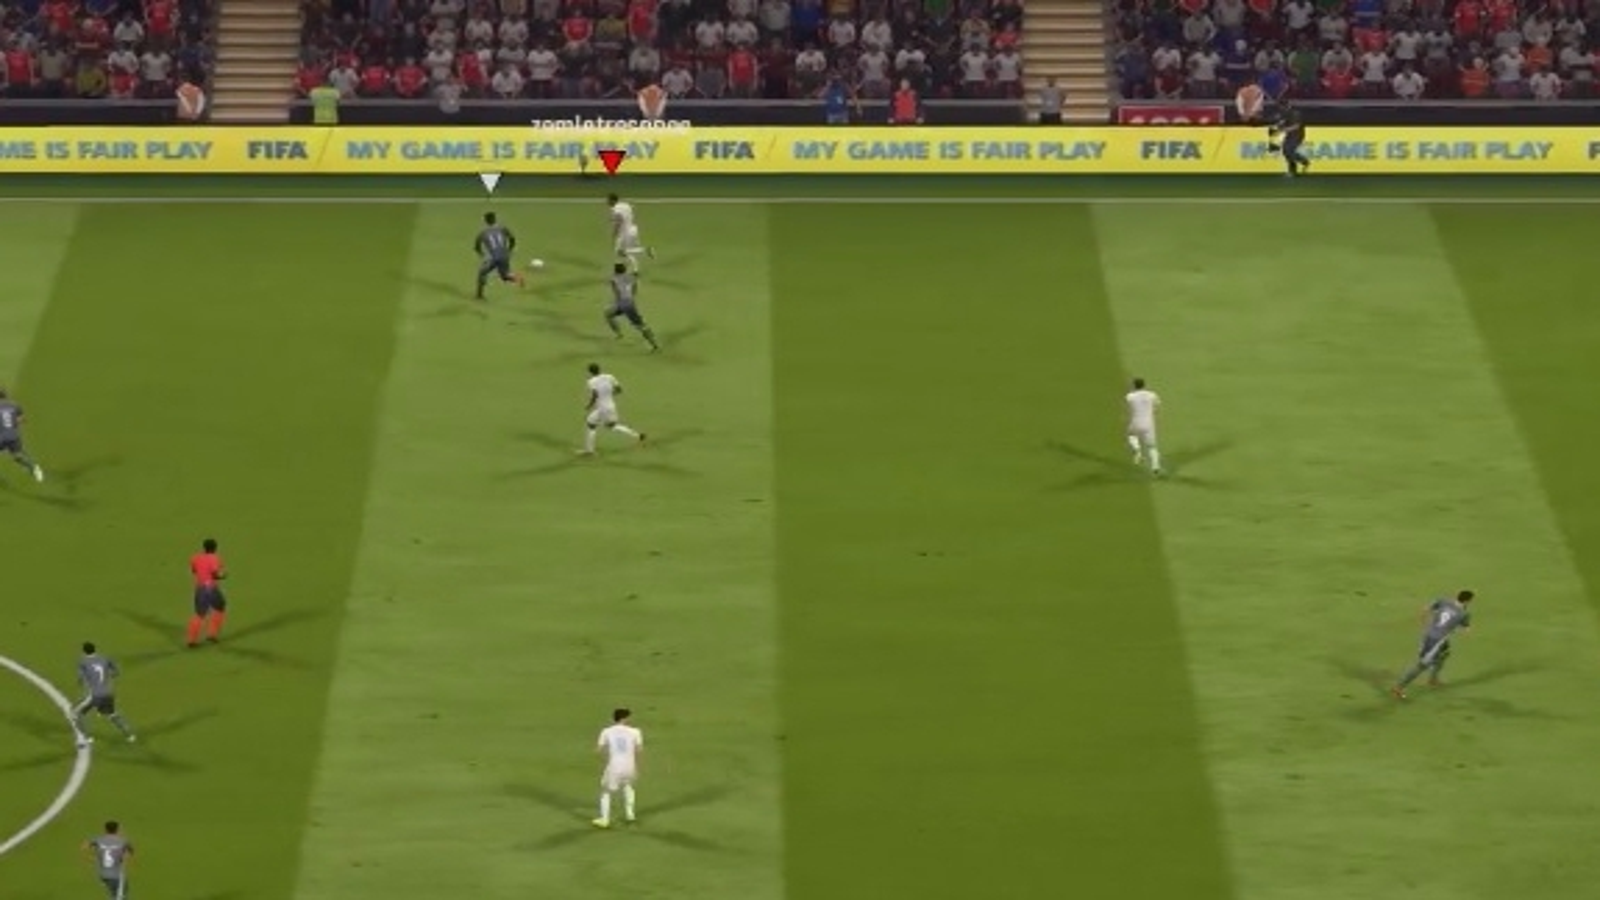 Why is FIFA 18 not available in PSP? - Quora